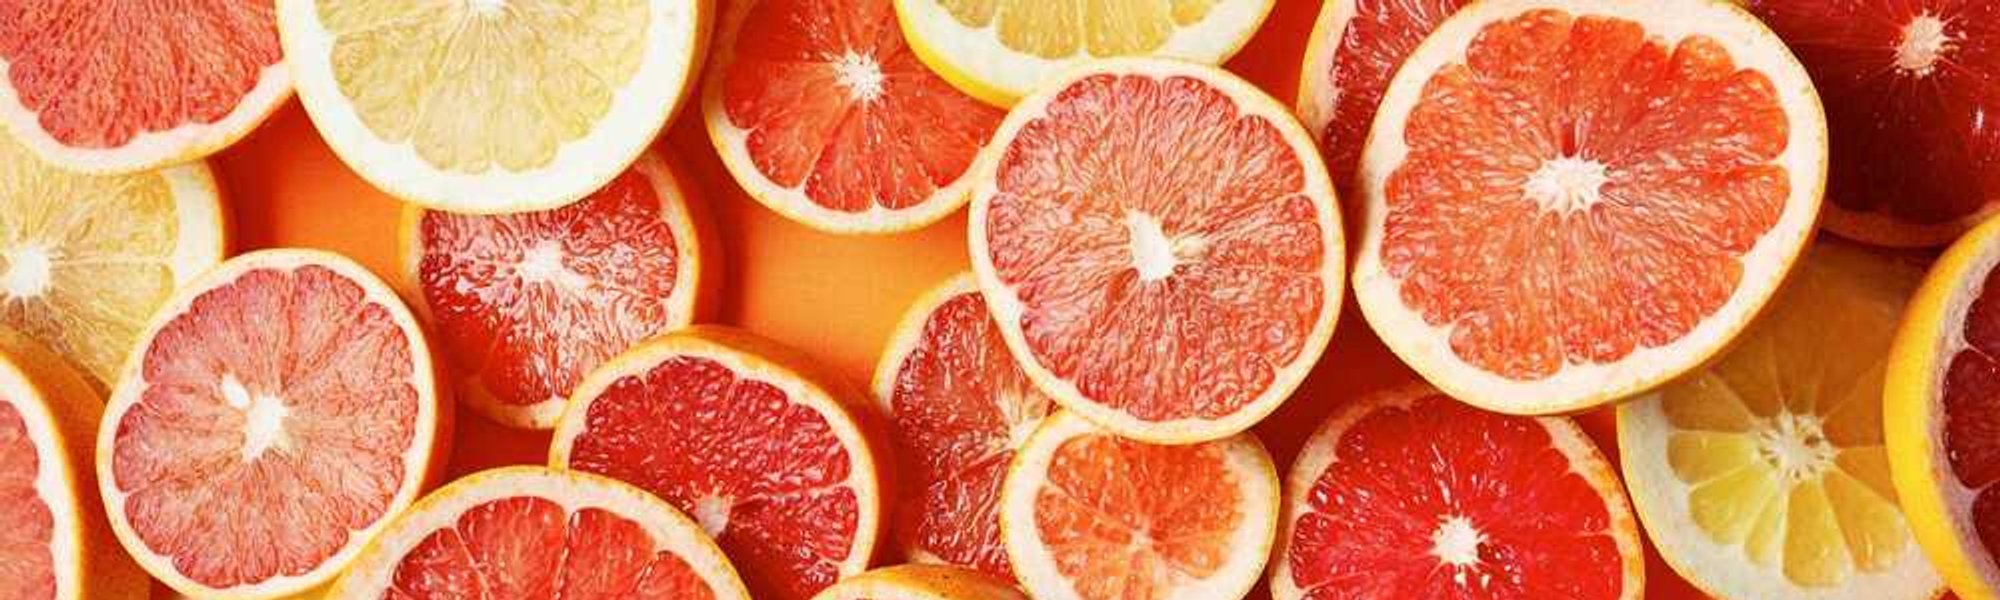 Vitamin C Benefits For The Skin Eat Your Veg To Get Glowing